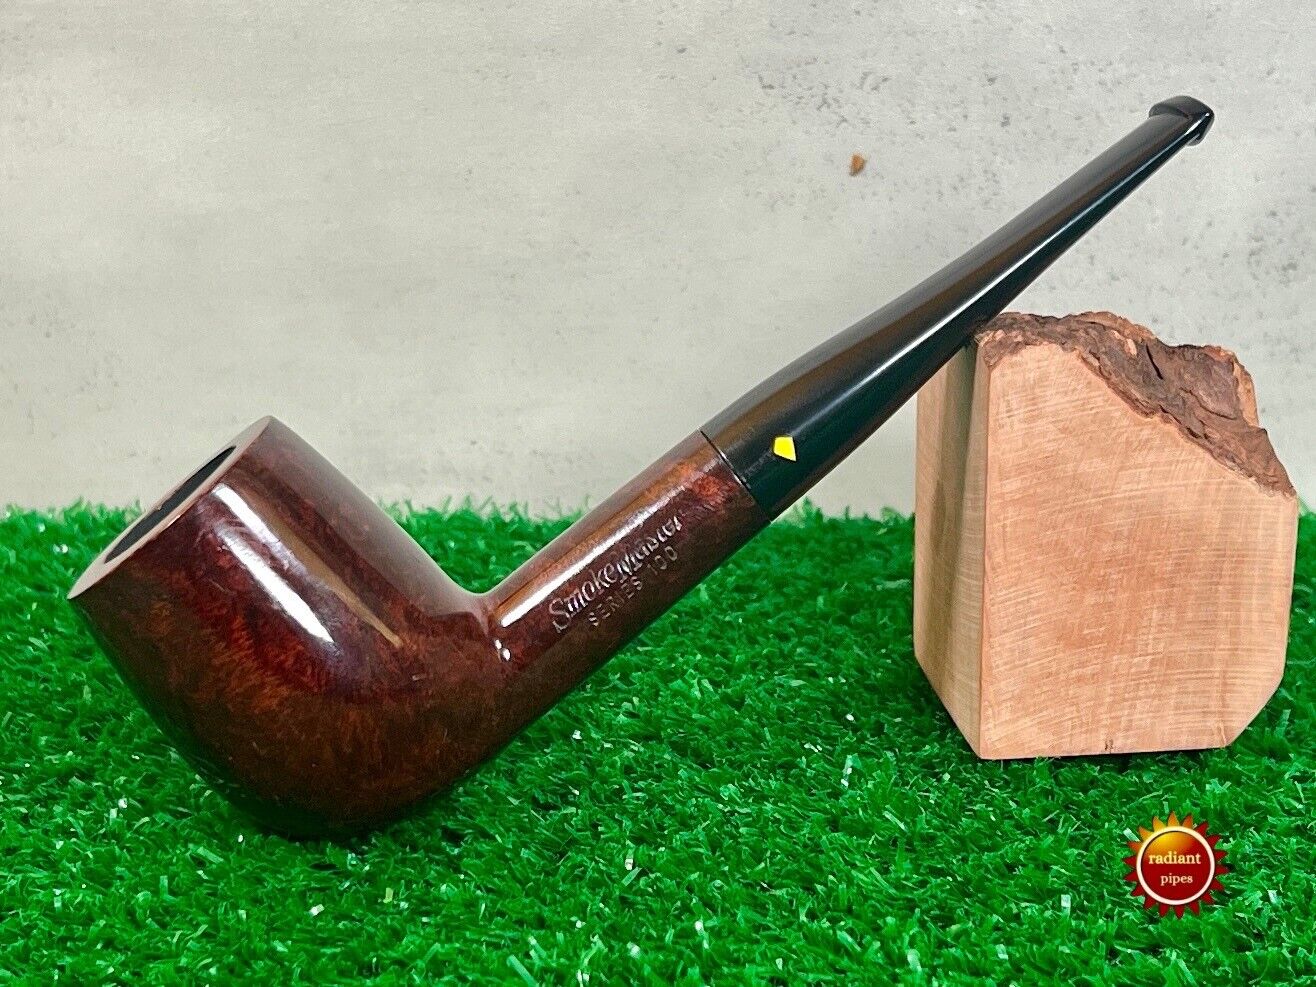 Rare Barely Smoked Smokemaster Vintage Pipe, Pre 1950’s, Holds Cleaner In Tenon